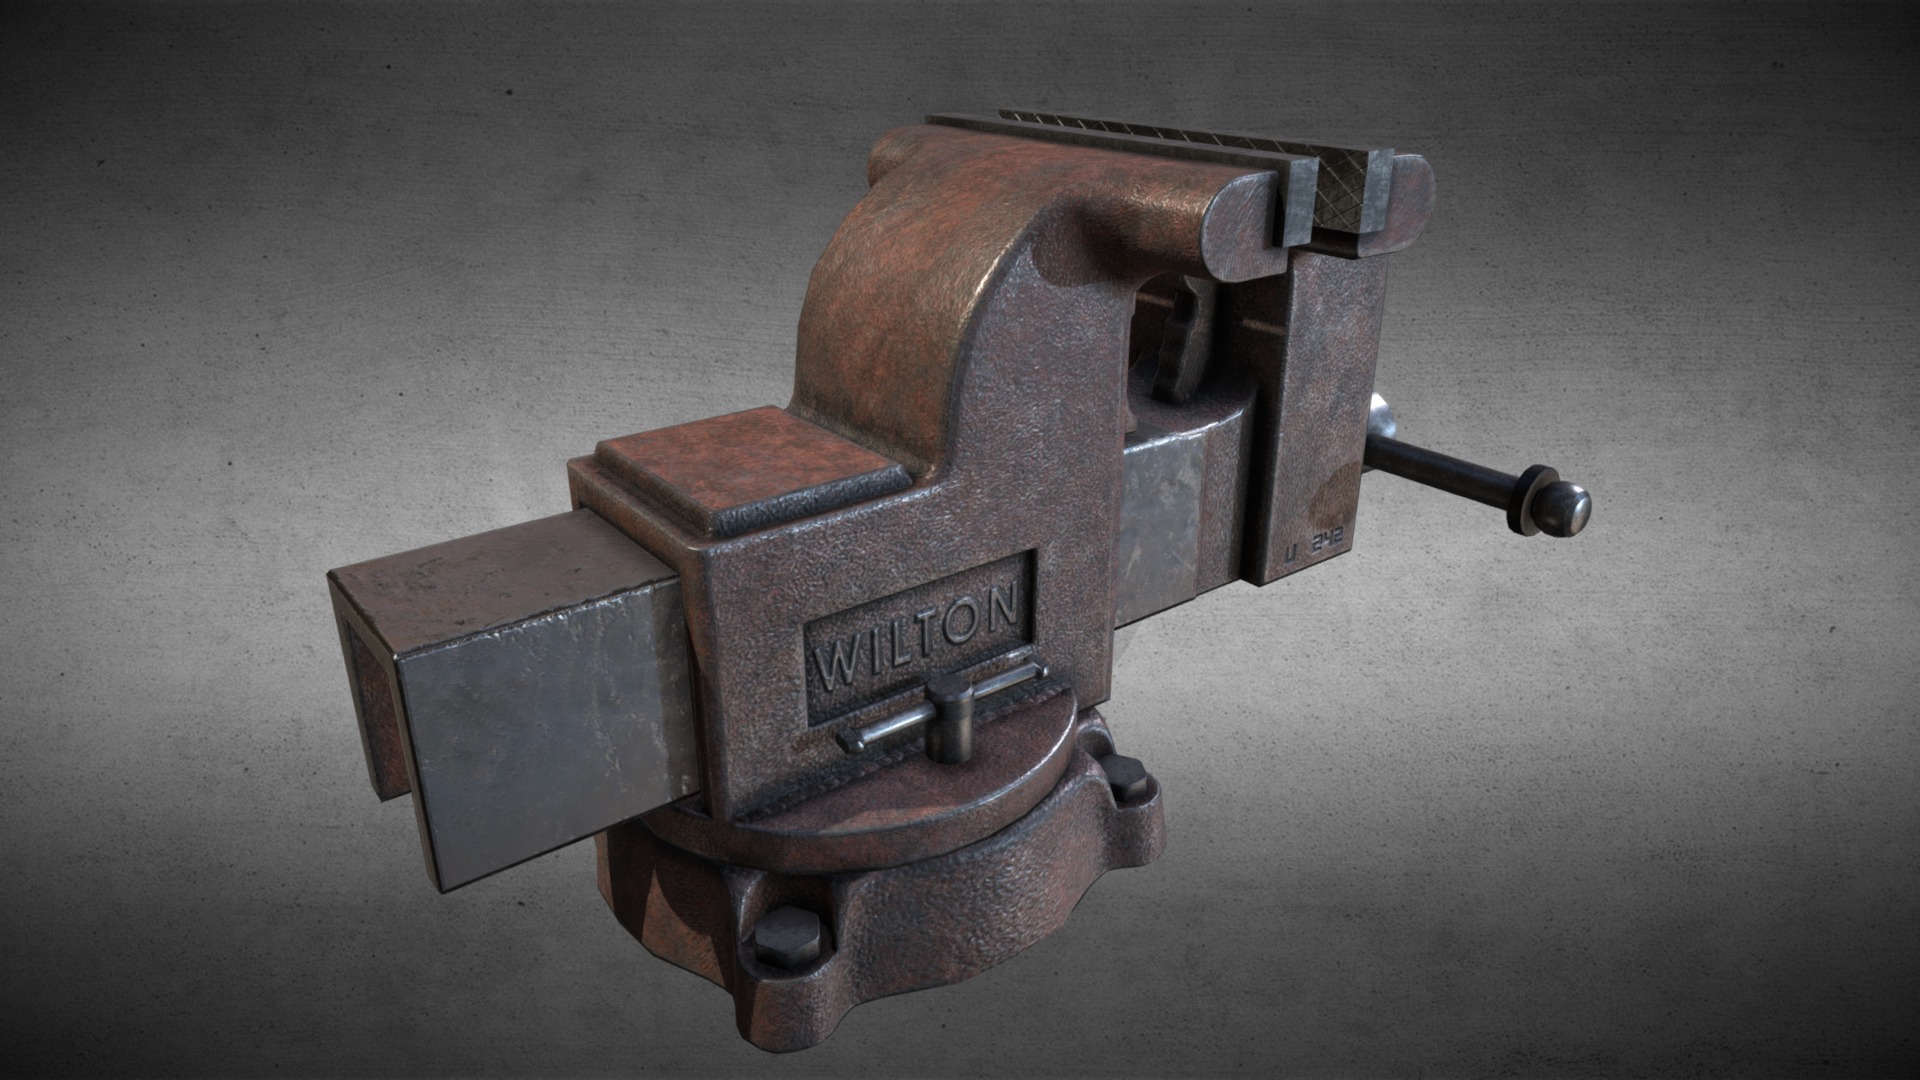 Vice Vise tool